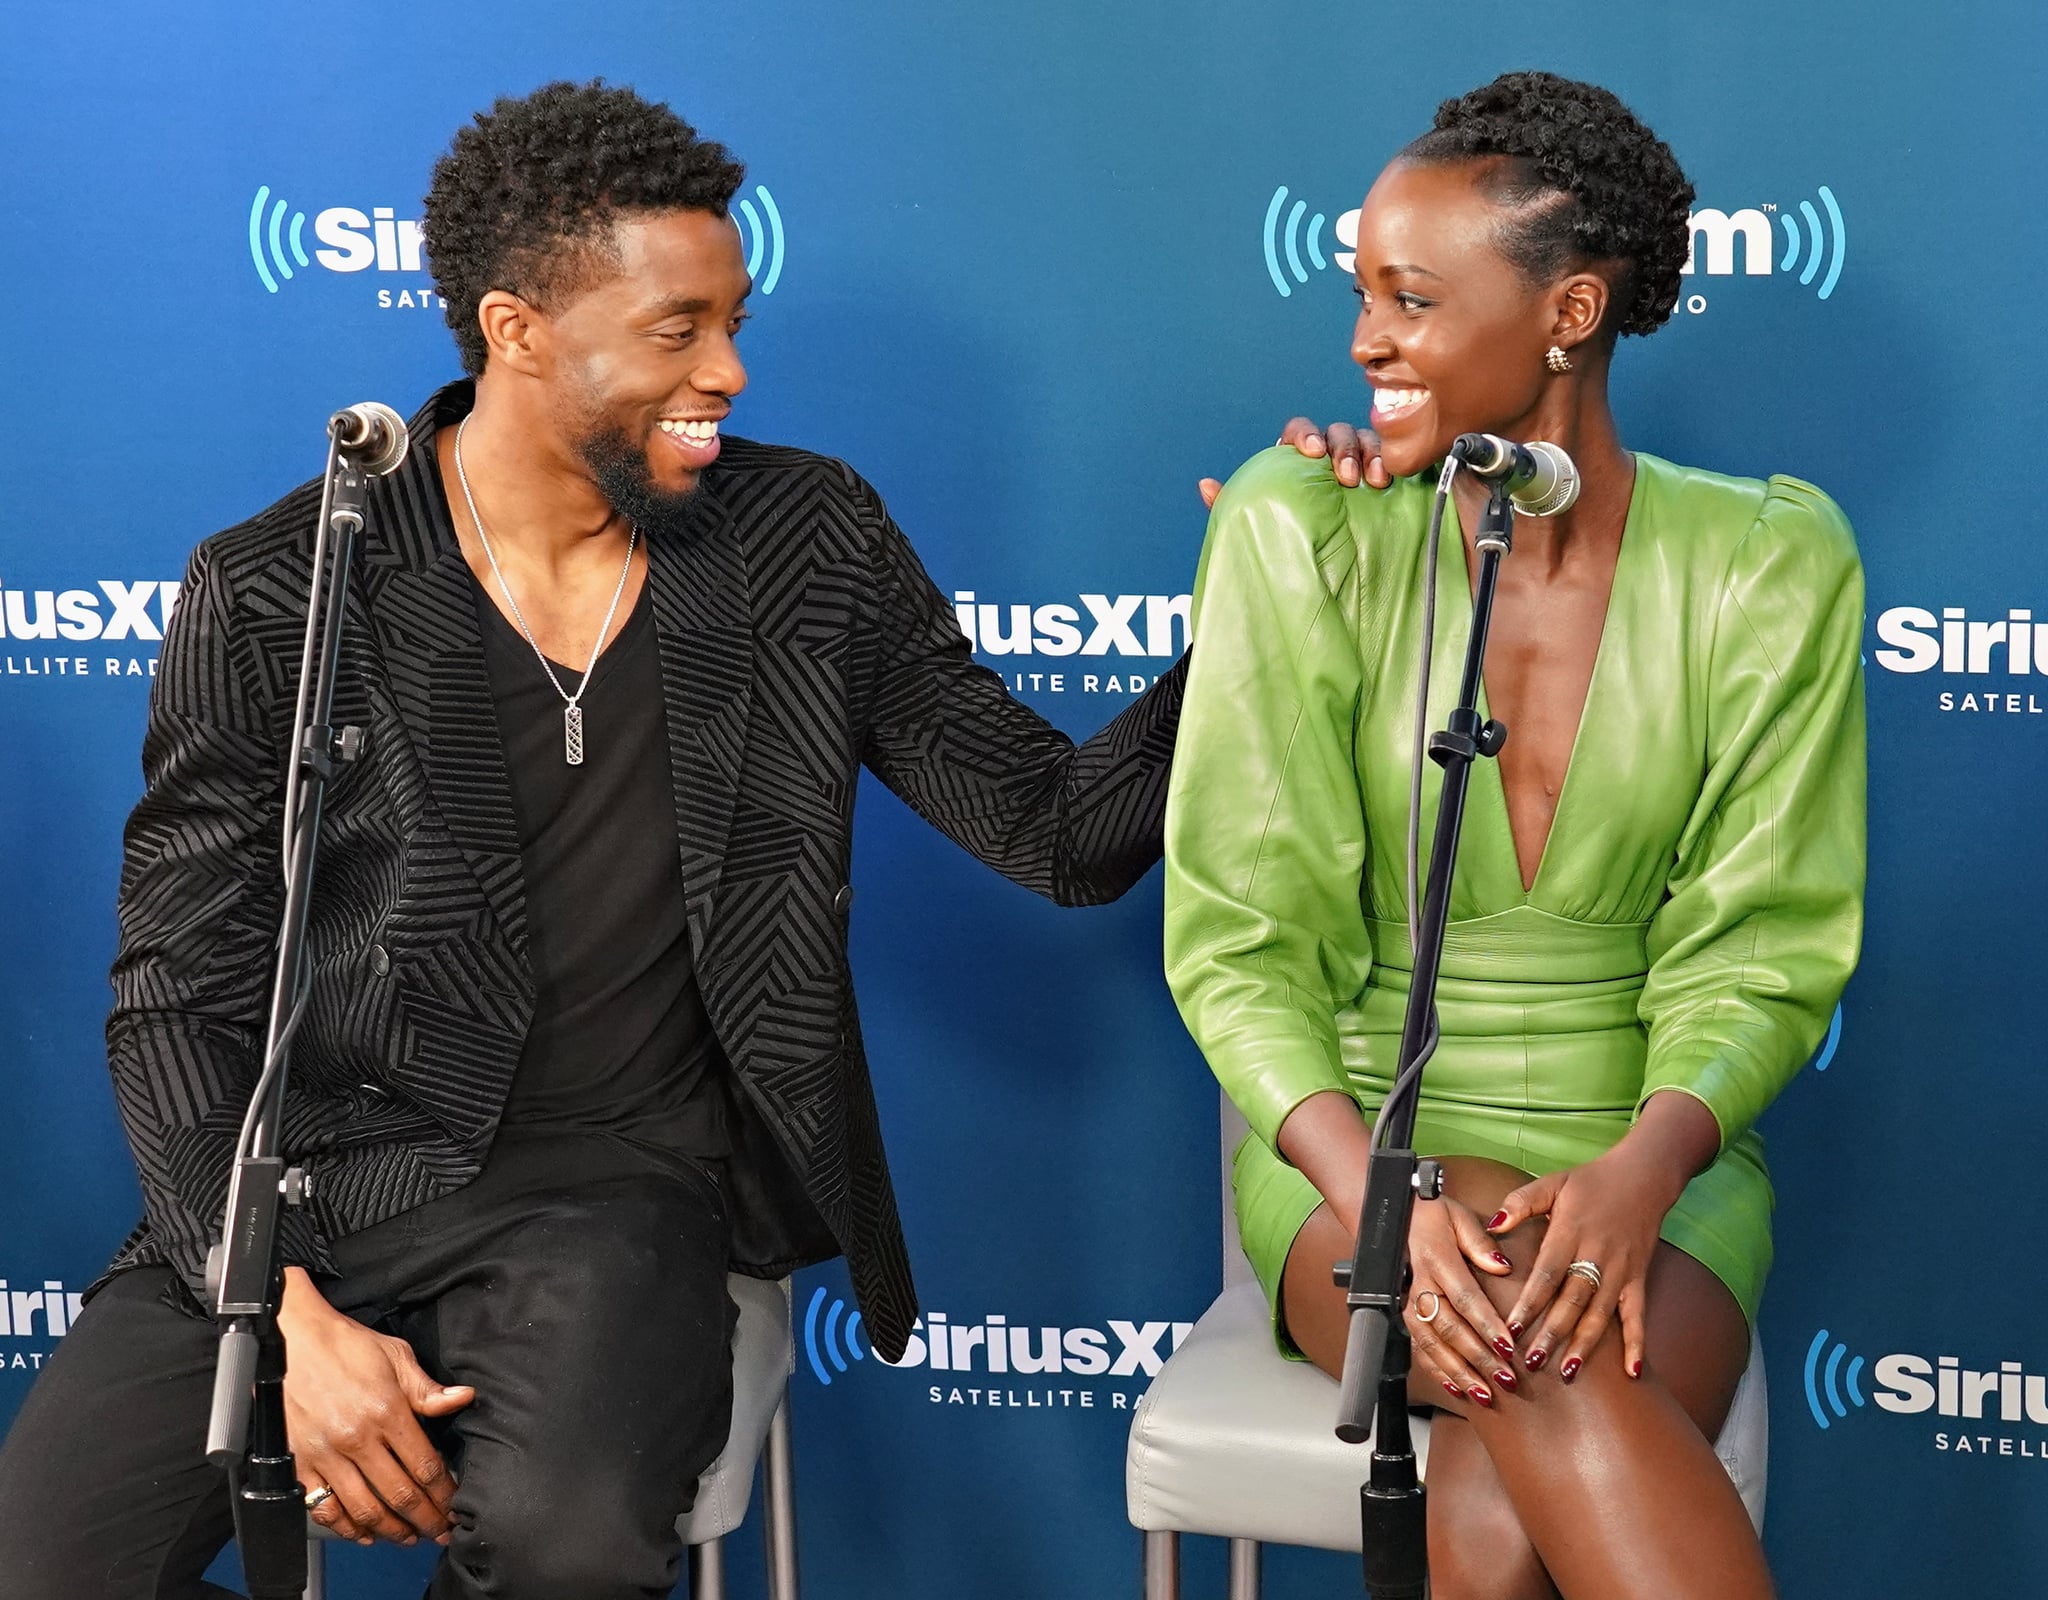 NEW YORK, NY - FEBRUARY 13:  Chadwick Boseman and Lupita Nyong'o take part in SiriusXM's Town Hall with the cast of Black Panther hosted by SiriusXM's Sway Calloway on February 13, 2018 in New York City.  (Photo by Cindy Ord/Getty Images for SiriusXM)